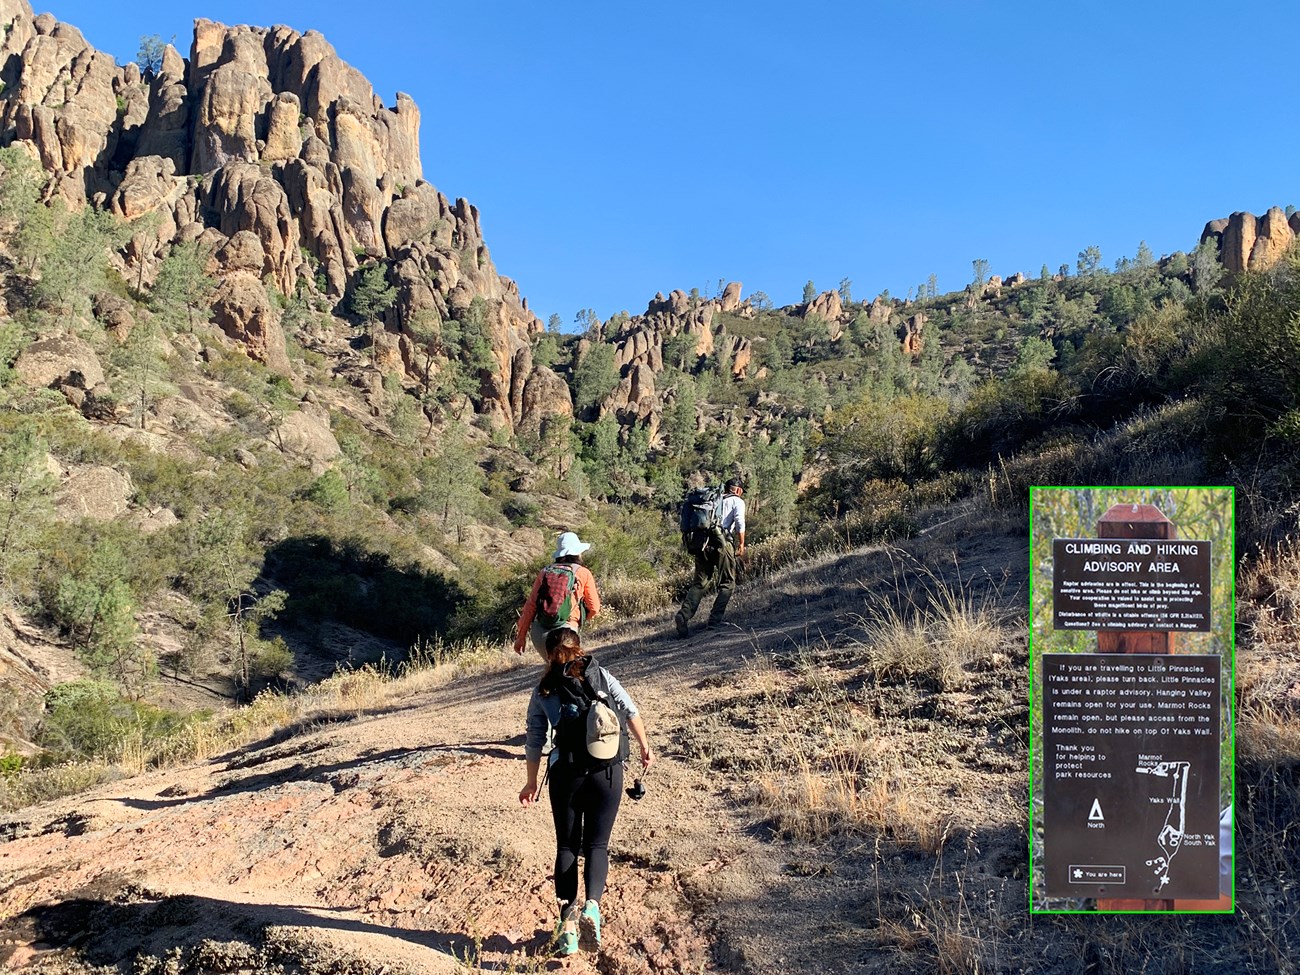 Biologist leading two other people and the photographer on a hiking trail through a shrubby landscape towards towering rock formations. Inset: A sign reads "Climbing and Hiking Advisory Area".